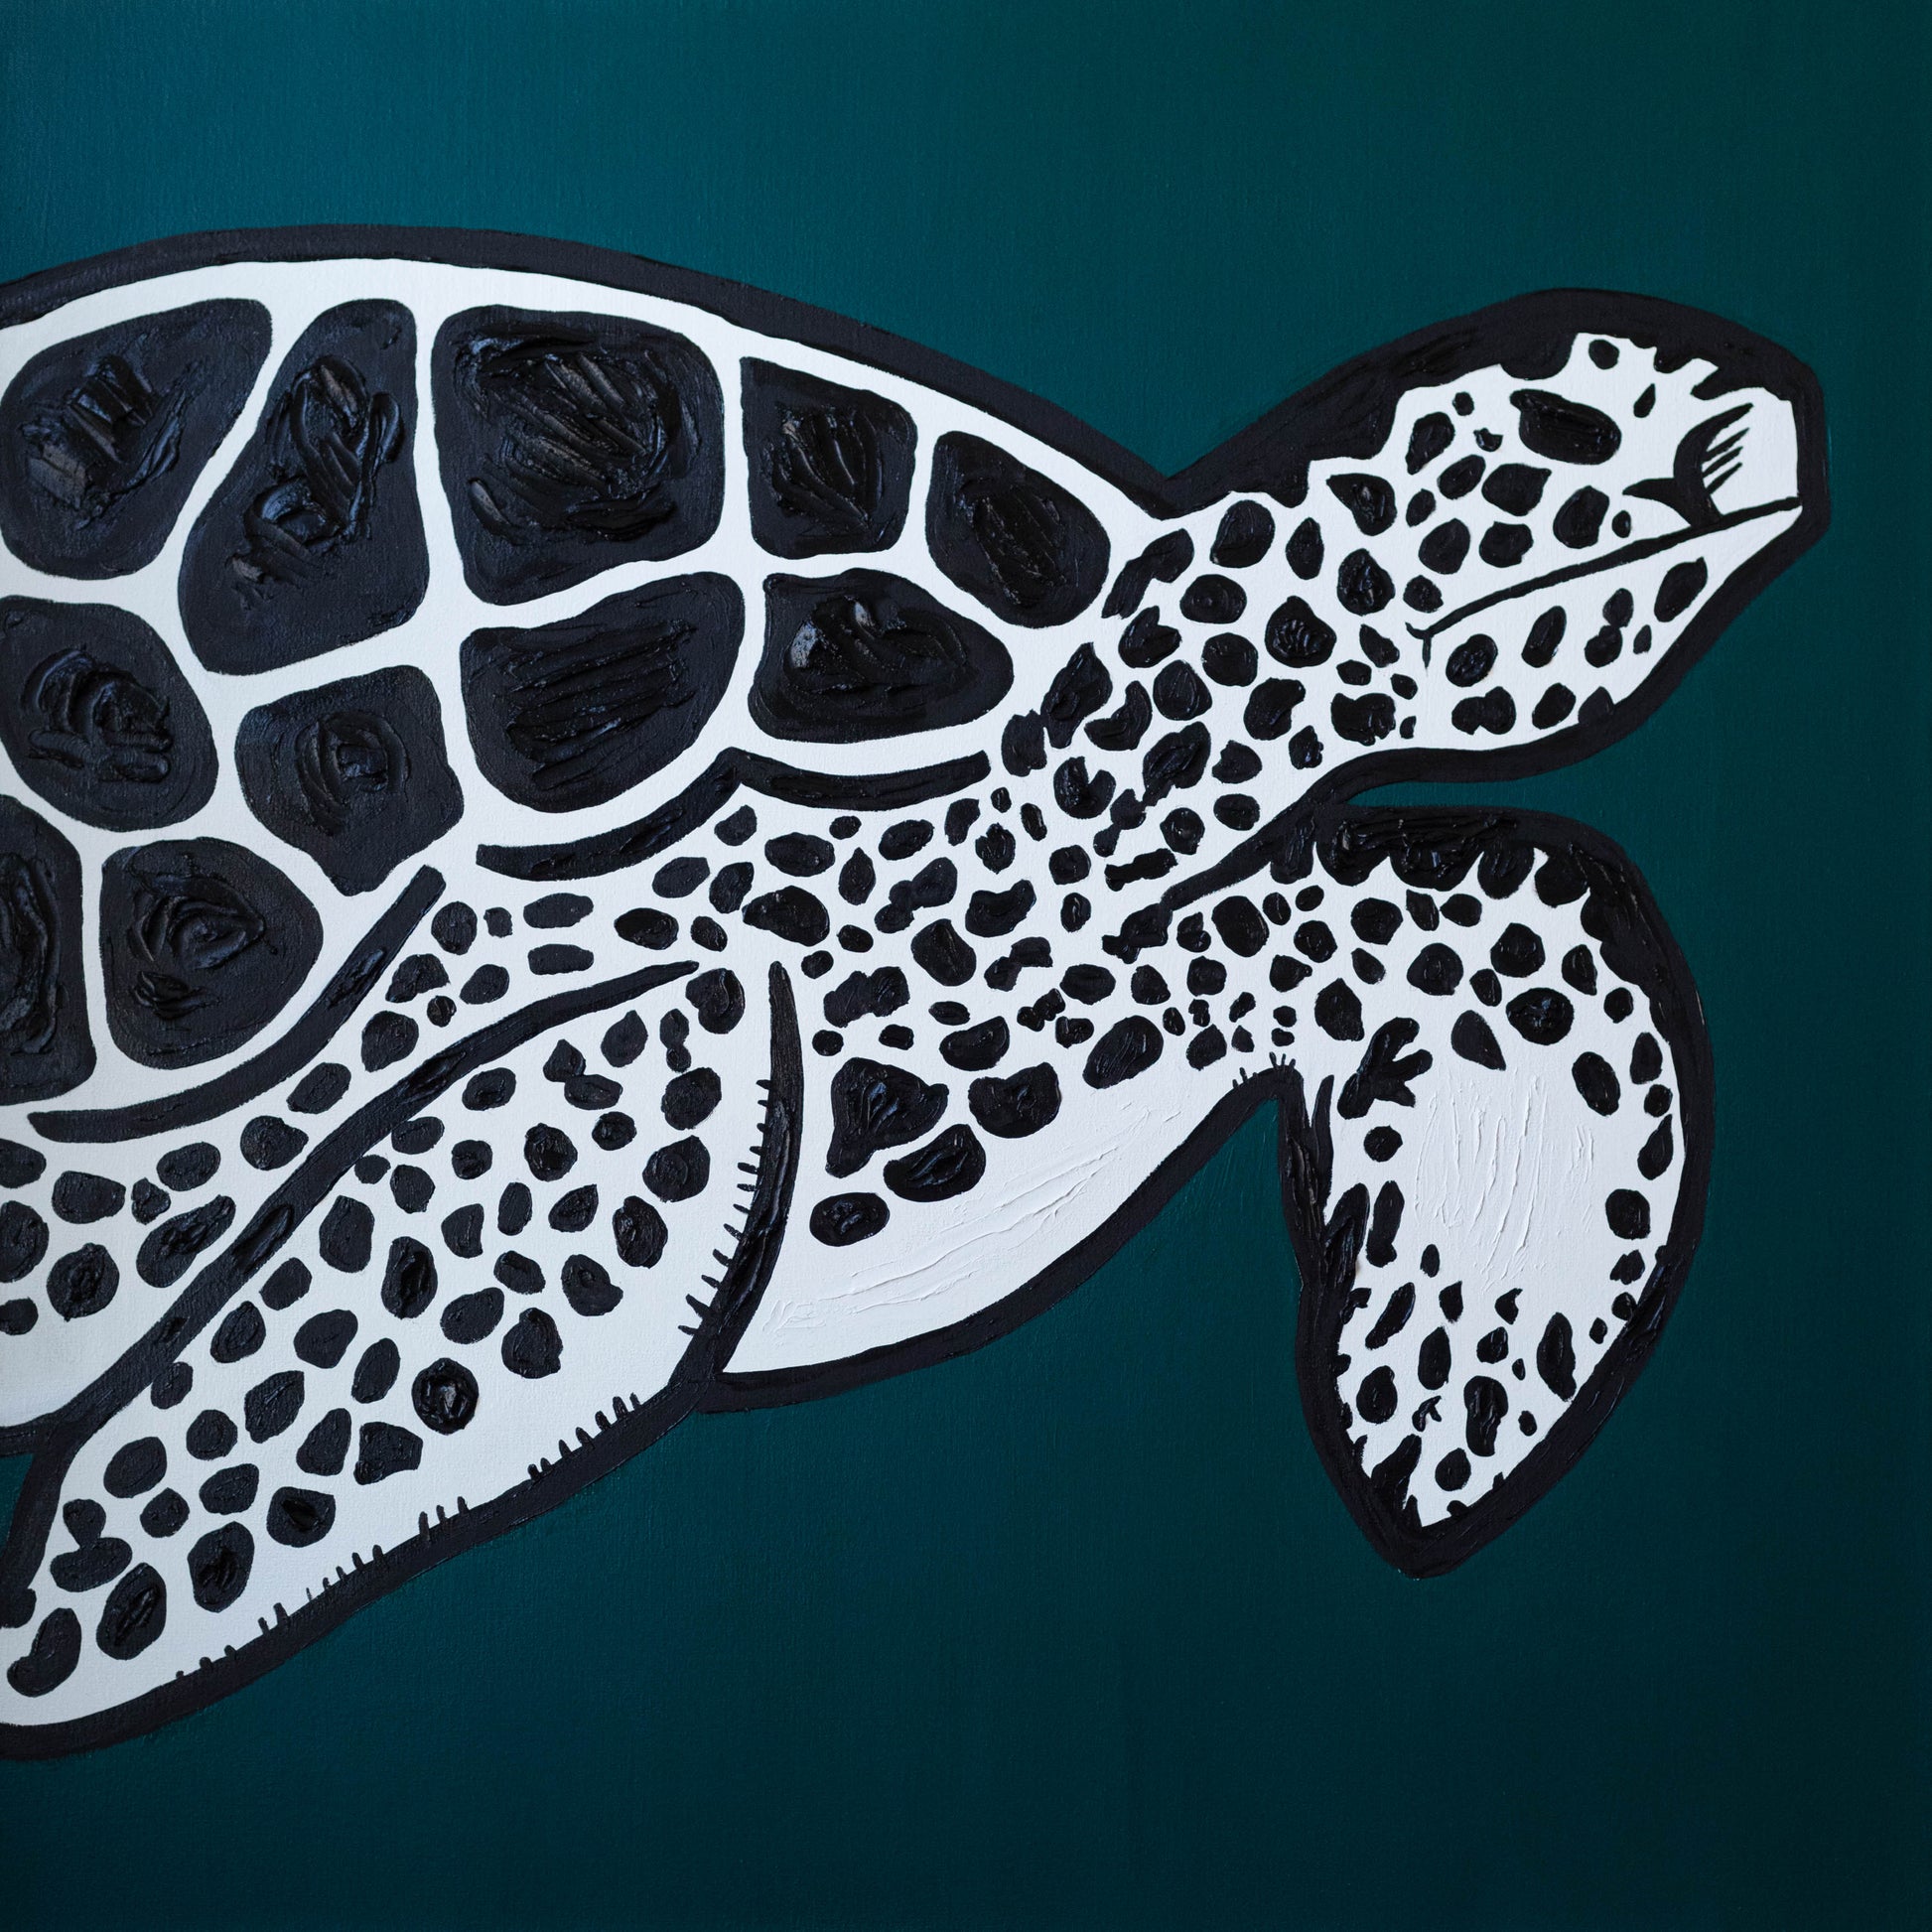 Sea Turtle by Richard Lilley - Mourlot Editions - Fine_Art - Poster - Lithograph - Wall Art - Vintage - Prints - Original